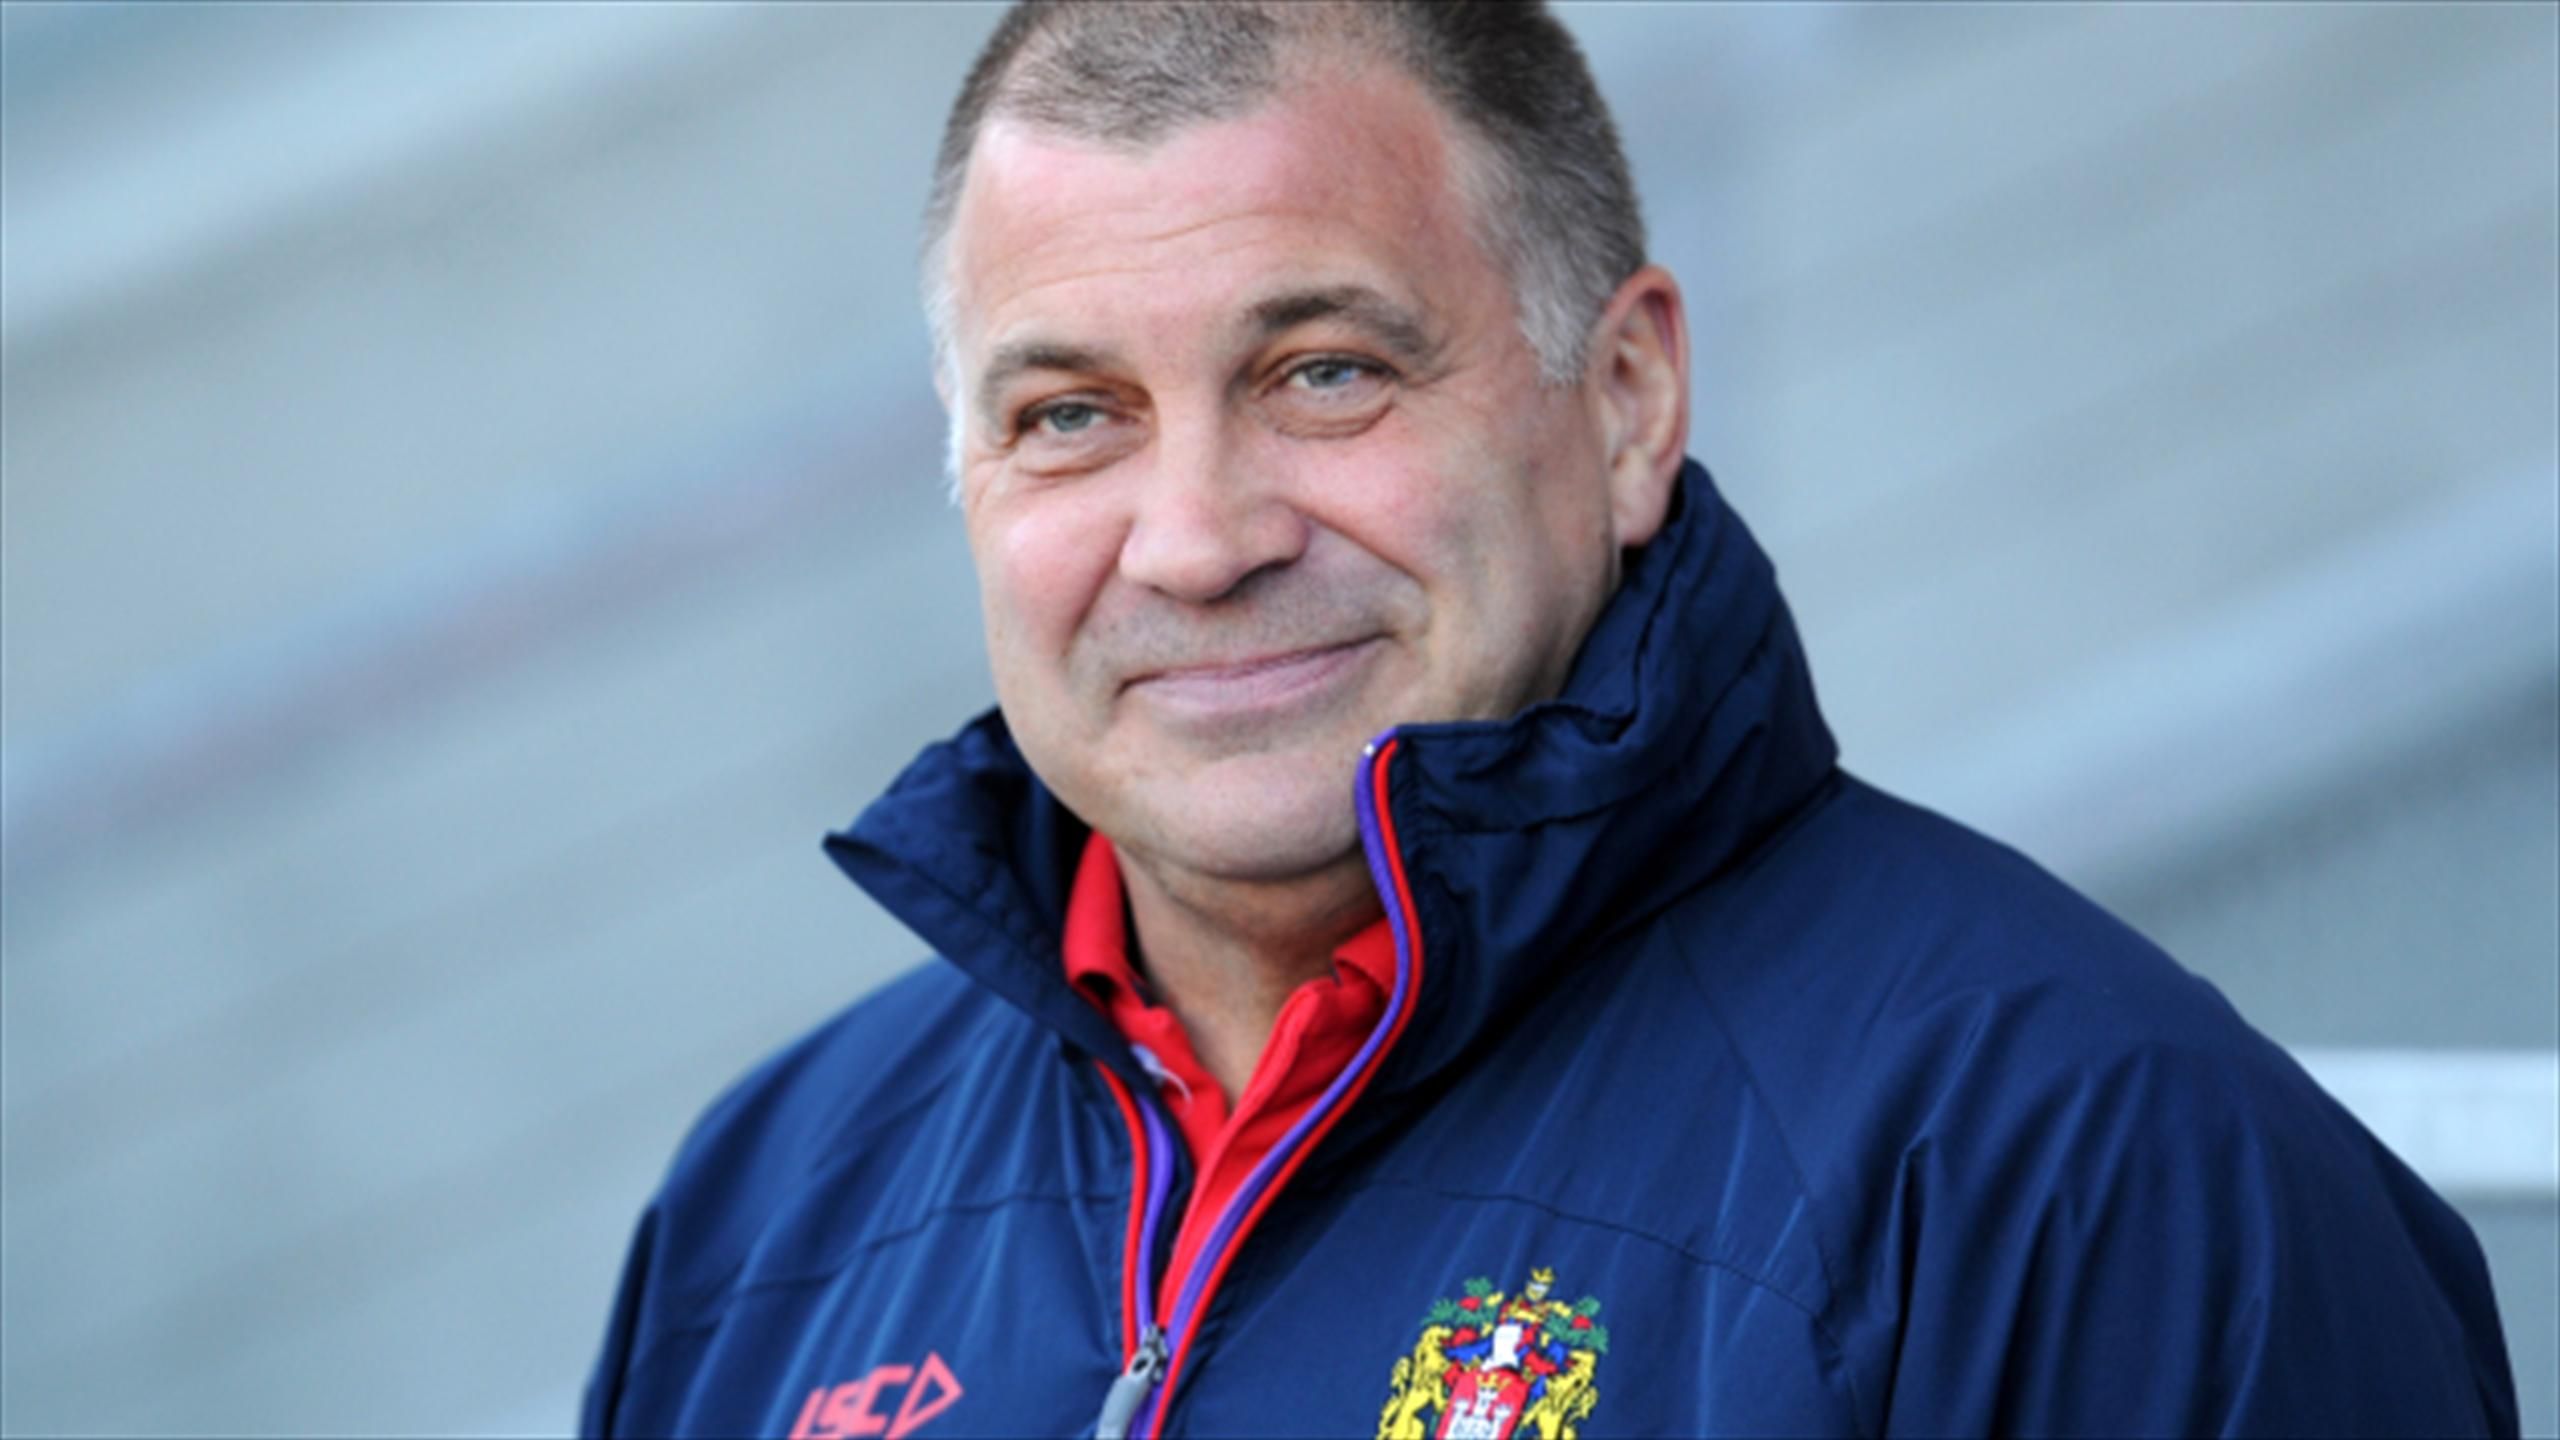 Shaun Wane ready for first England match after 16 months as head coach, England rugby league team